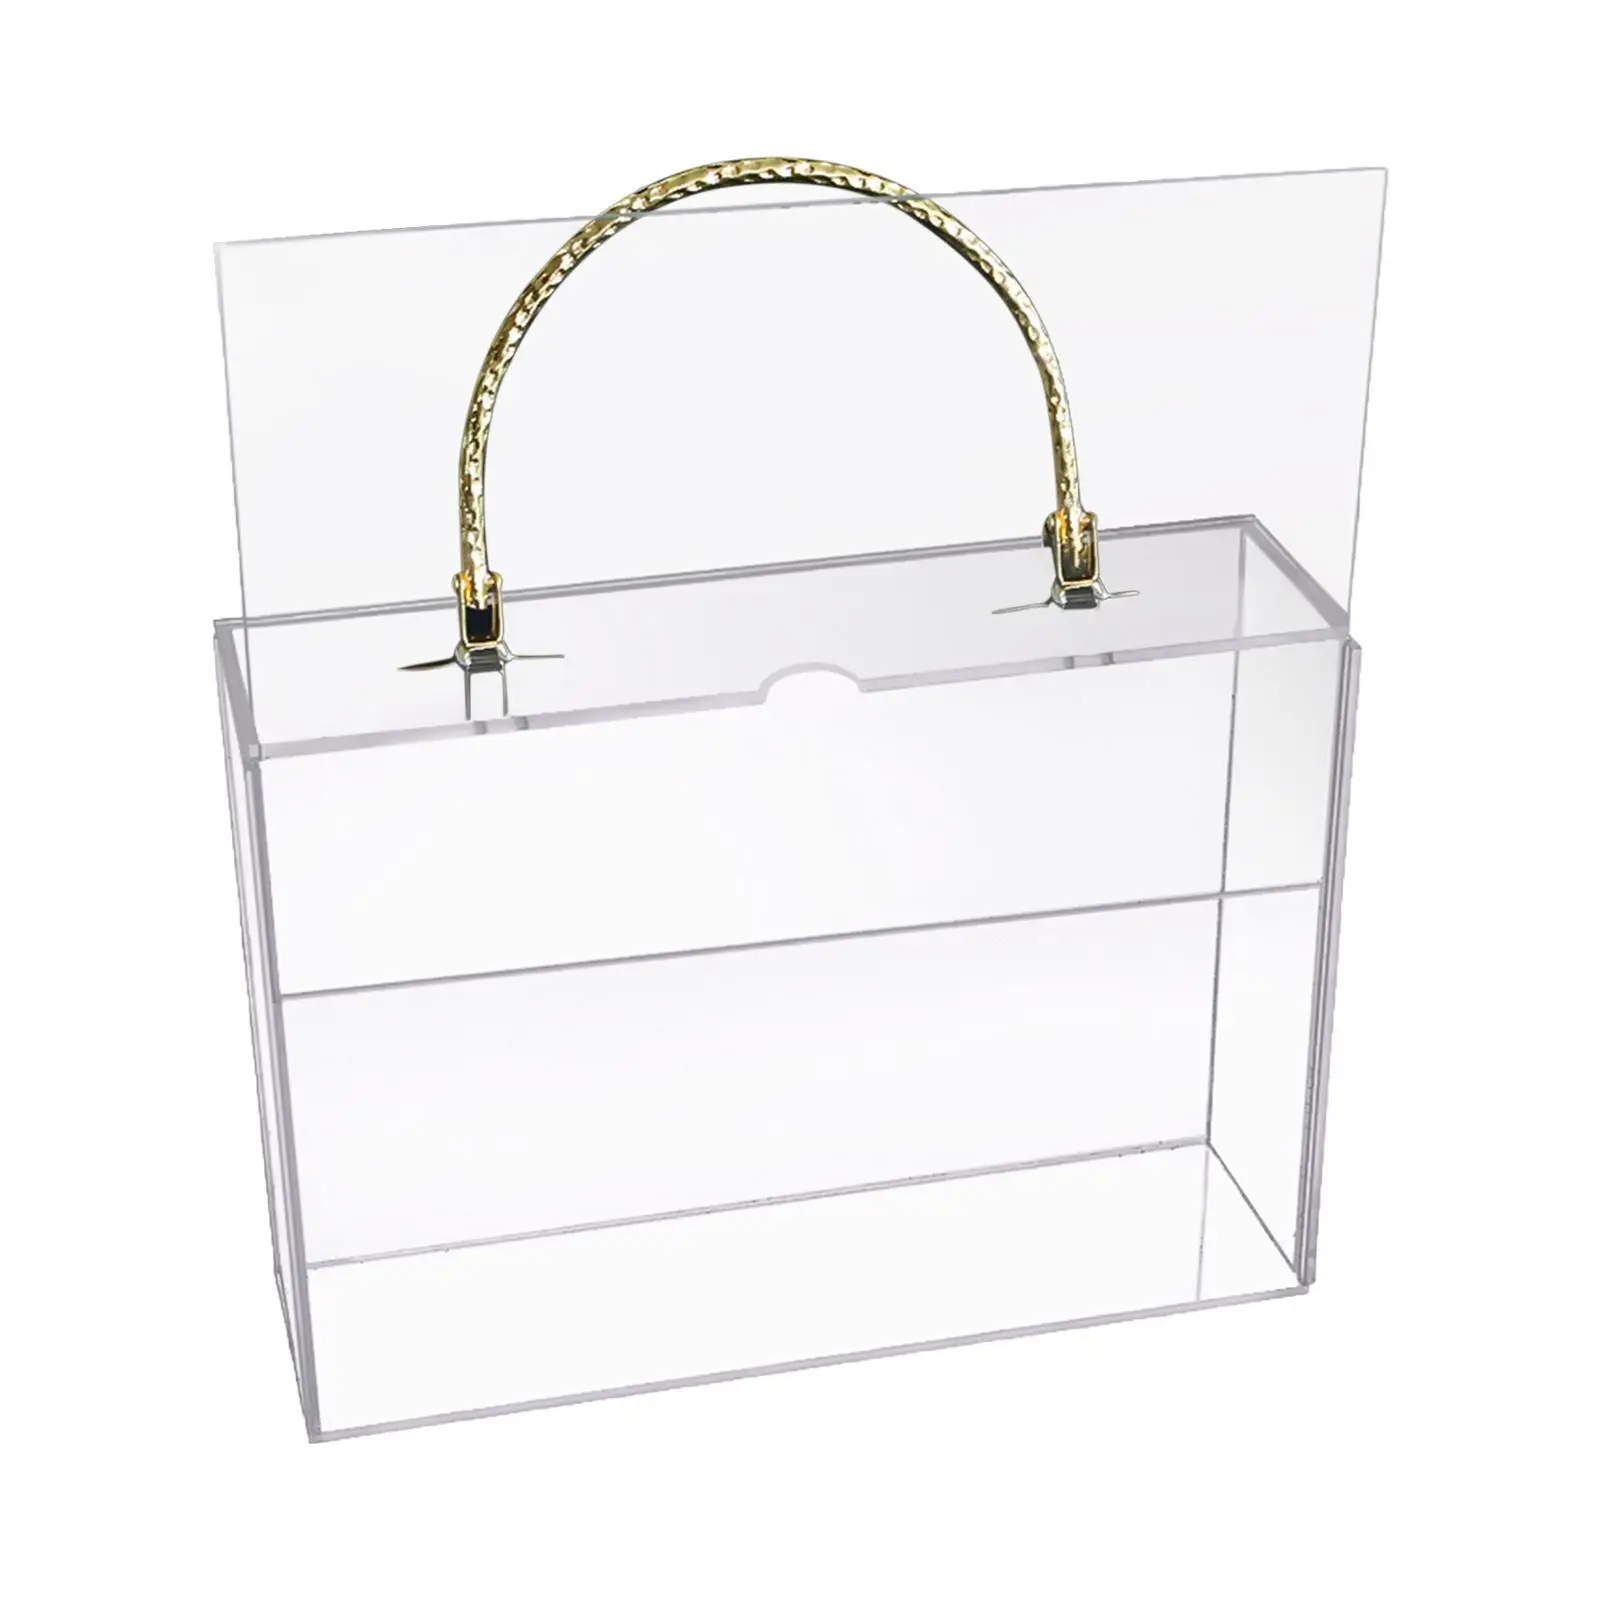 Clear Acrylic Flower Box Rectangular Flower Arrangement Box Portable Gift Boxes for Clothes Dried Flower Display Box Shadow Box